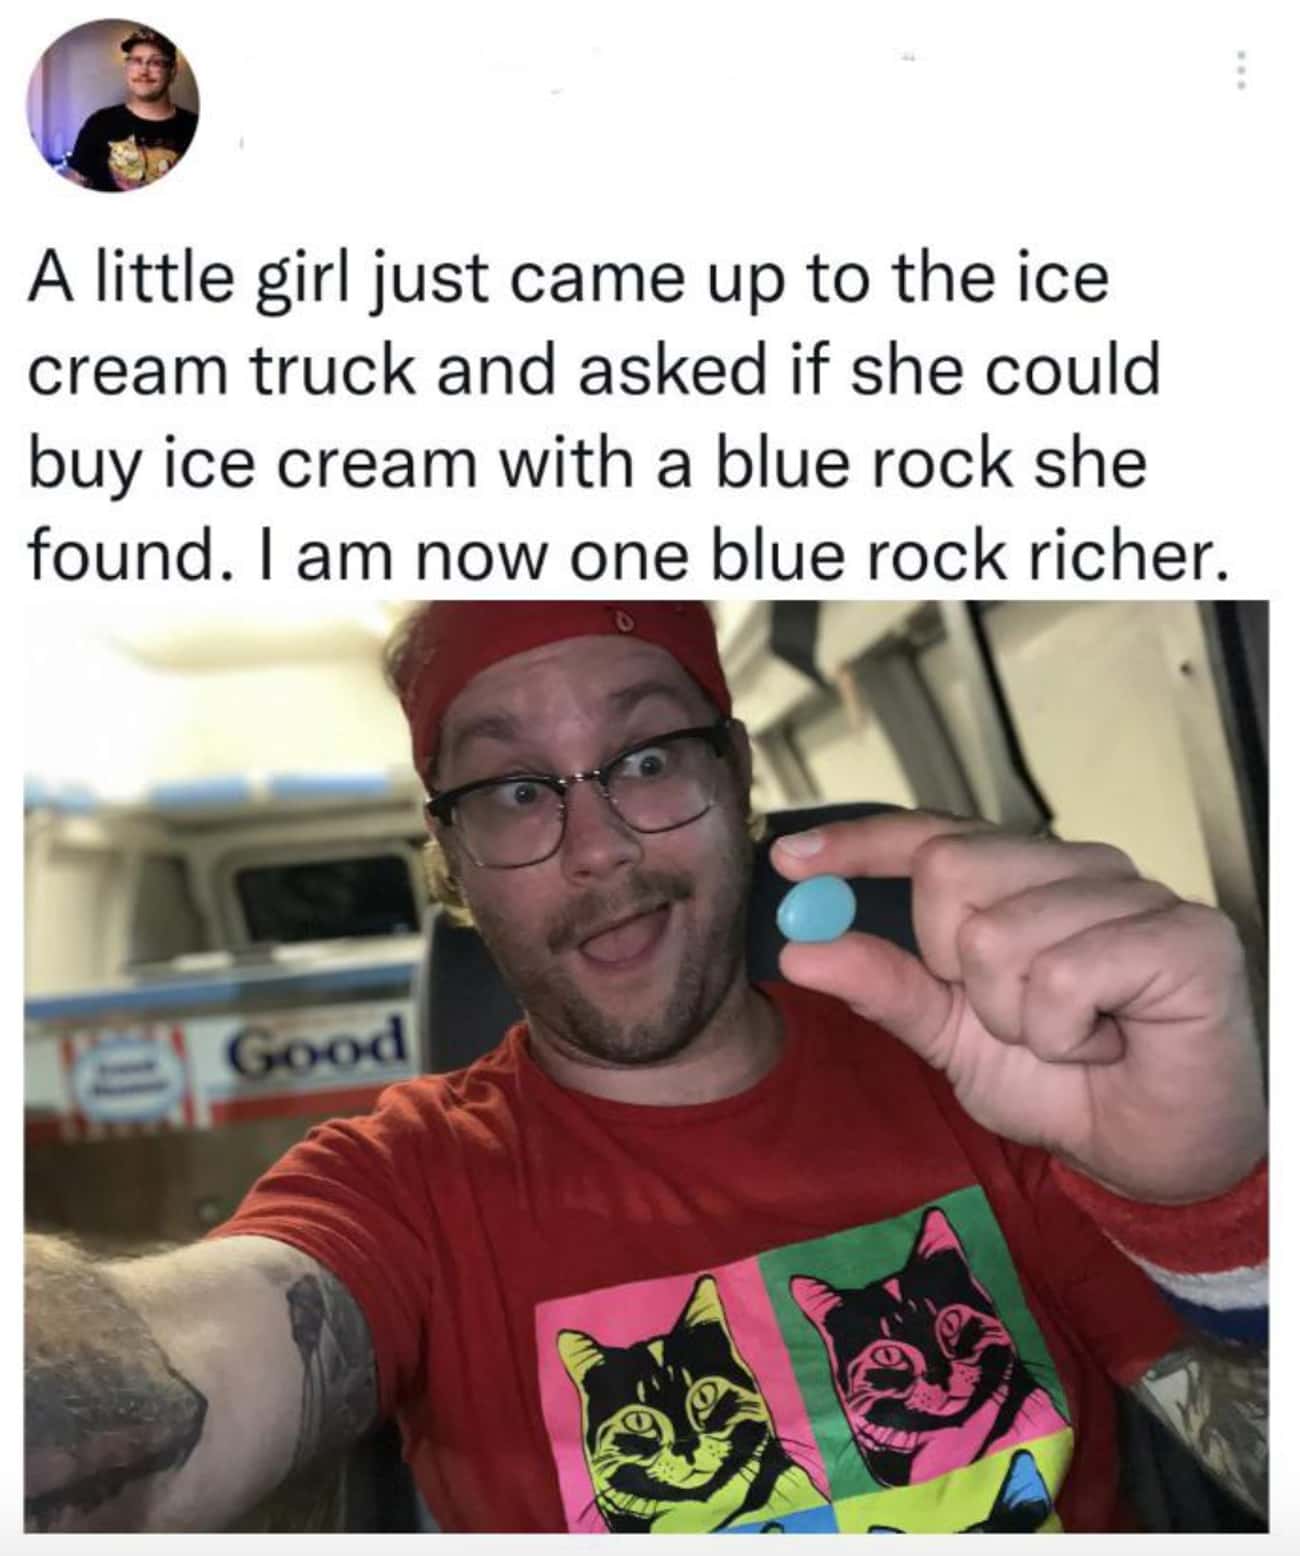 The Ice Cream Truck Driver Accepted It As A Form Of Payment